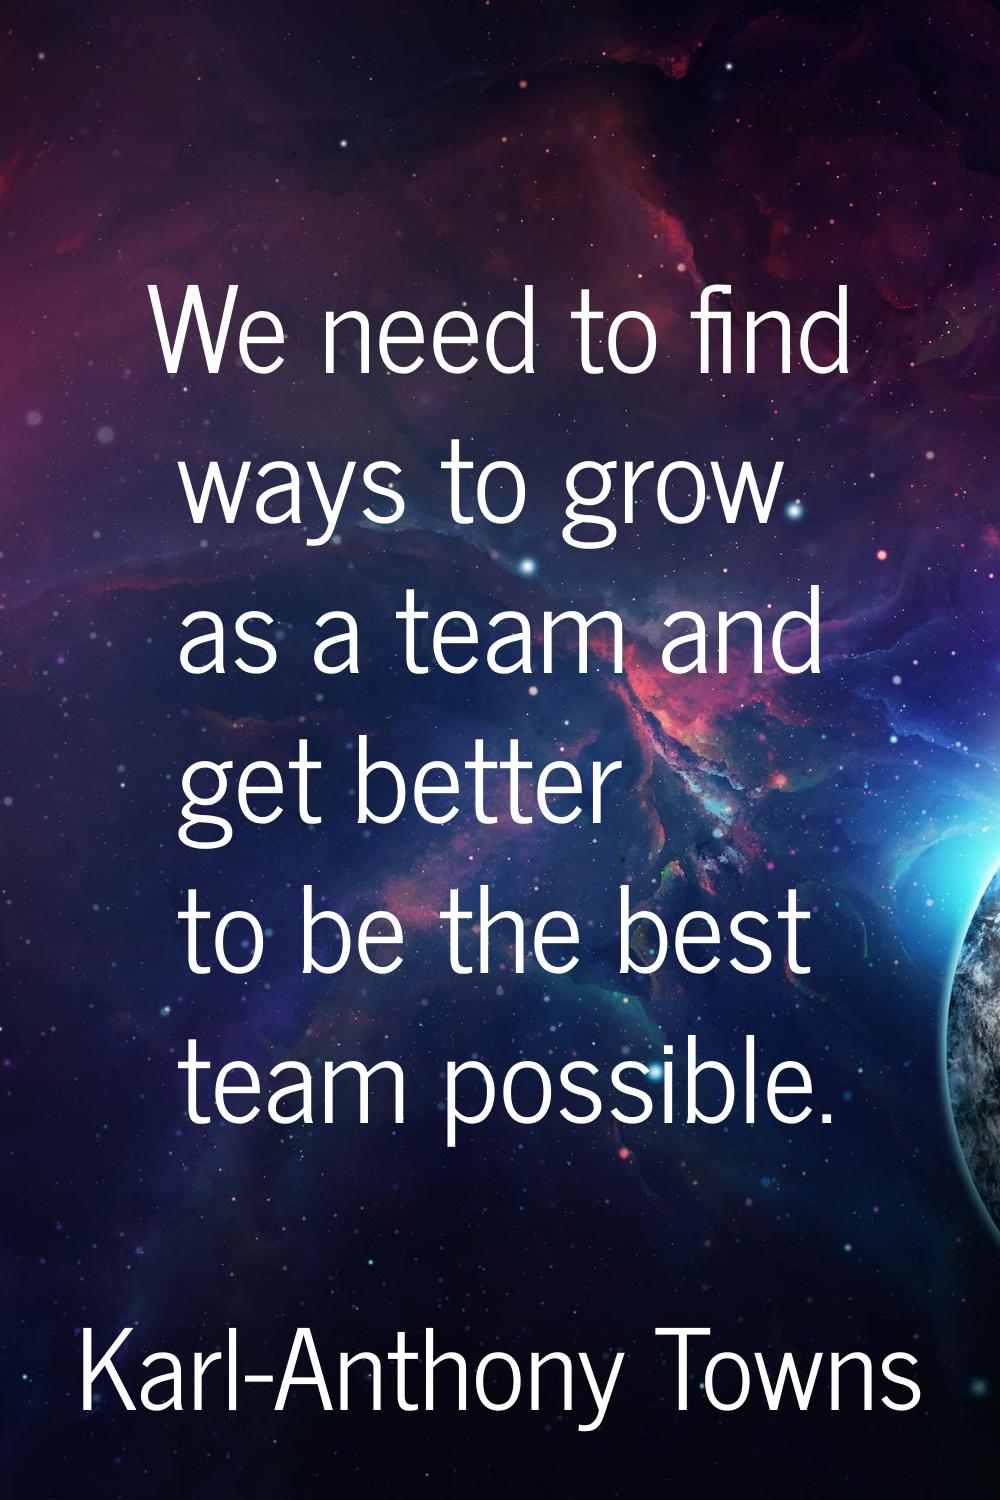 We need to find ways to grow as a team and get better to be the best team possible.